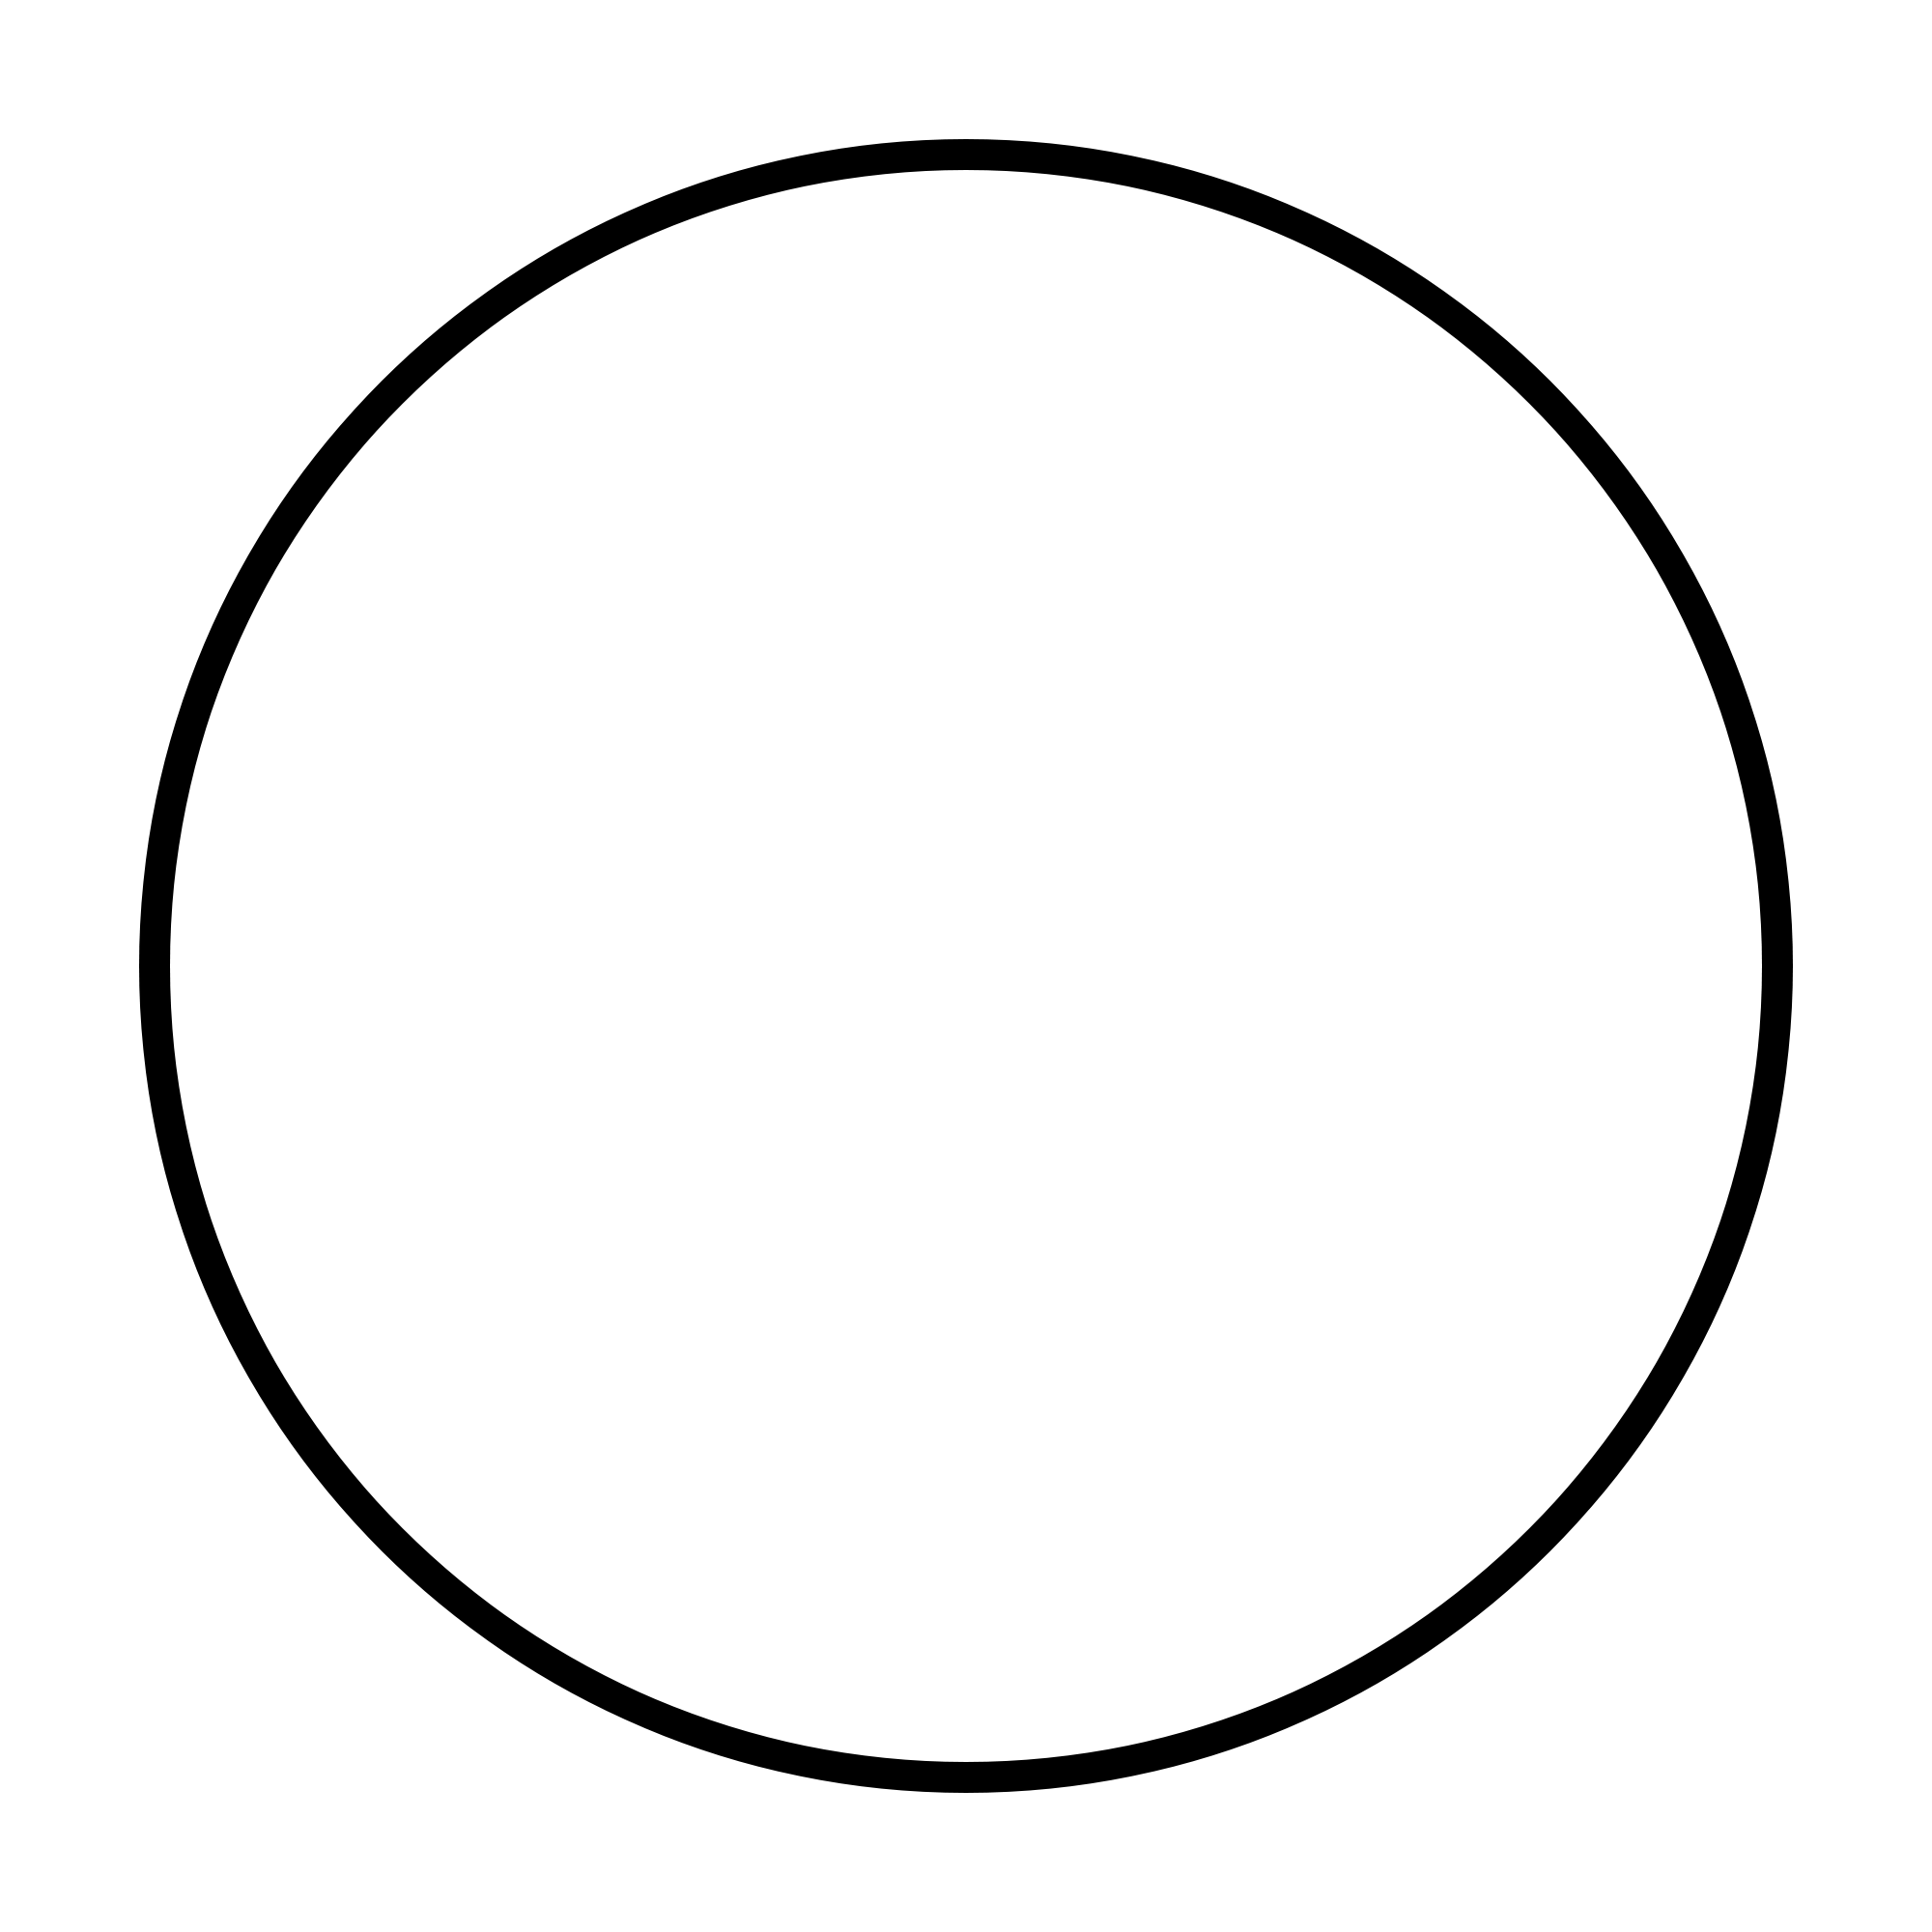 File:Circle - black simple.svg - Wikimedia Commons